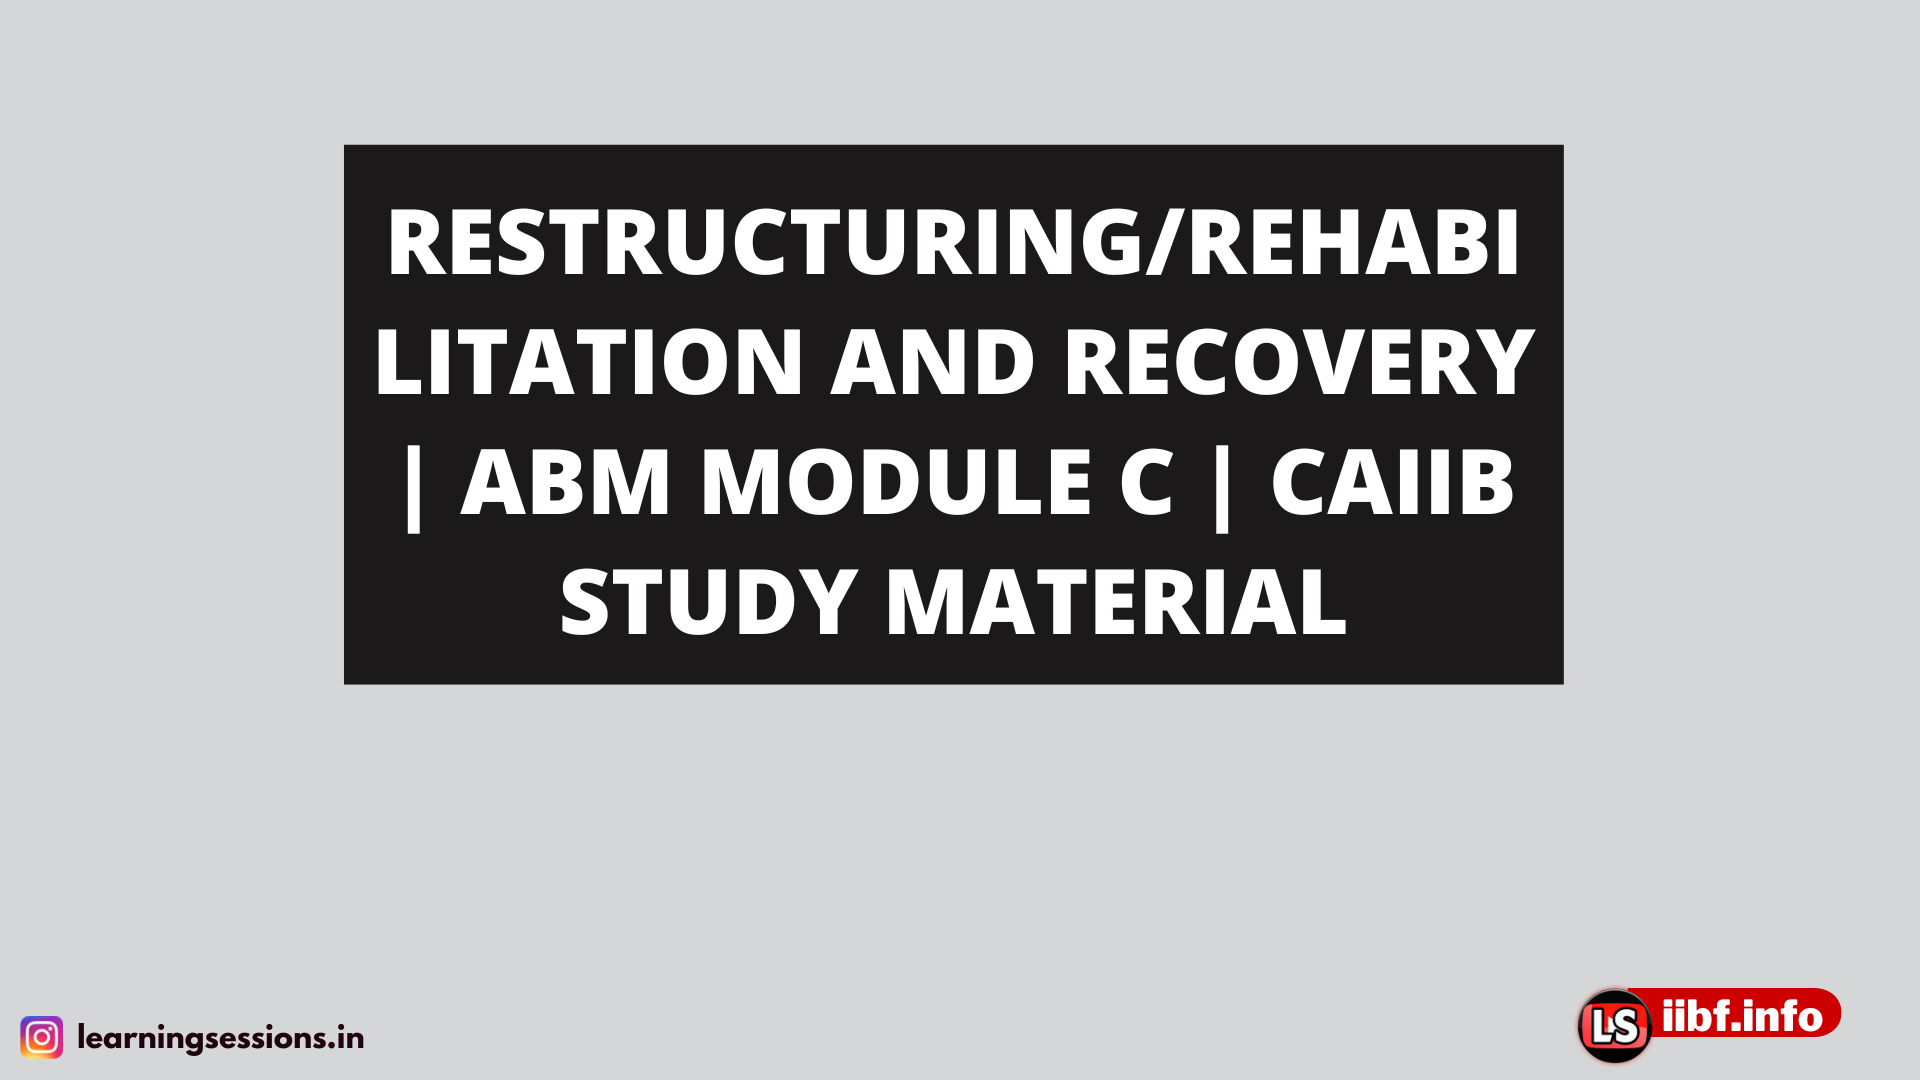 RESTRUCTURING/REHABILITATION AND RECOVERY | ABM MODULE C | CAIIB STUDY MATERIAL